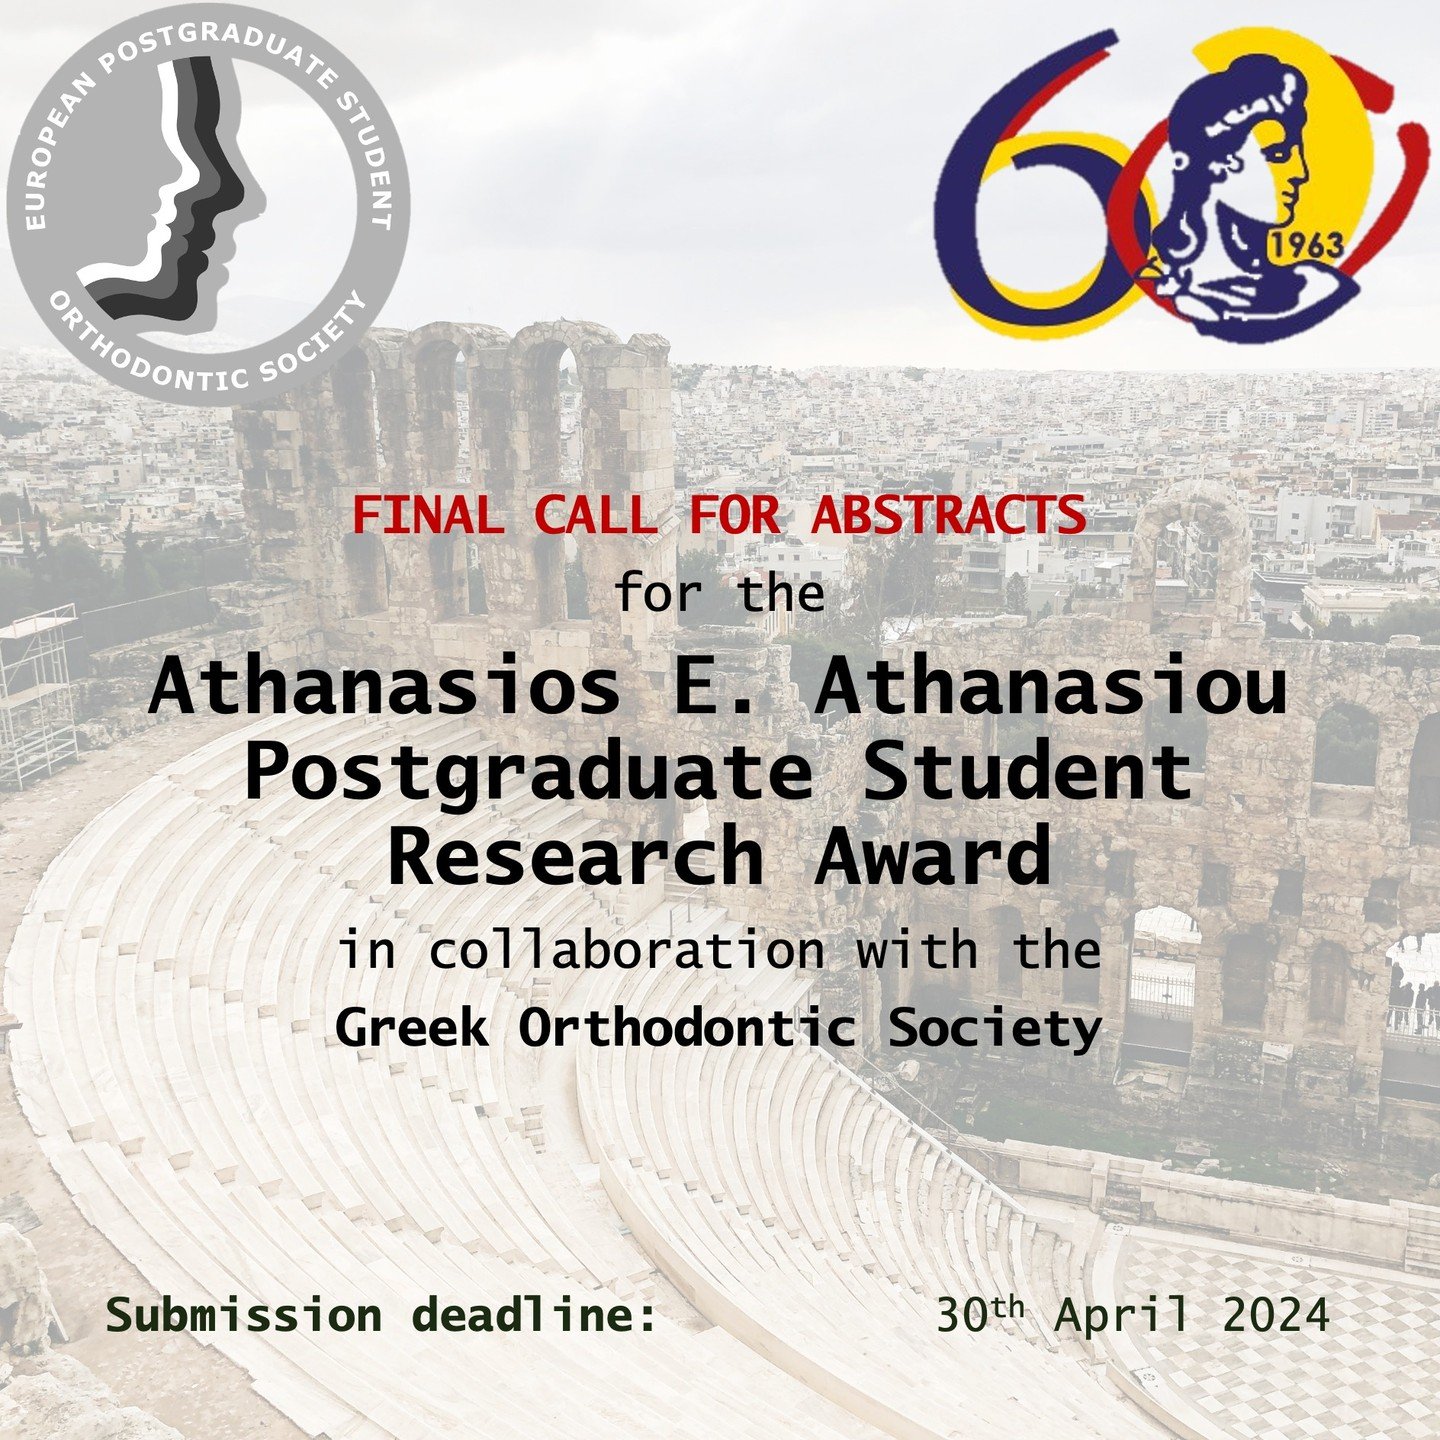 REMINDER: The abstract submission deadline is 30th April 2024 for the Athanasios E. Athanasiou Postgraduate Student Research Award, in collaboration with the Greek Orthodontic Society (GOS).

The winner will receive a cash prize of &euro;500!

Check 